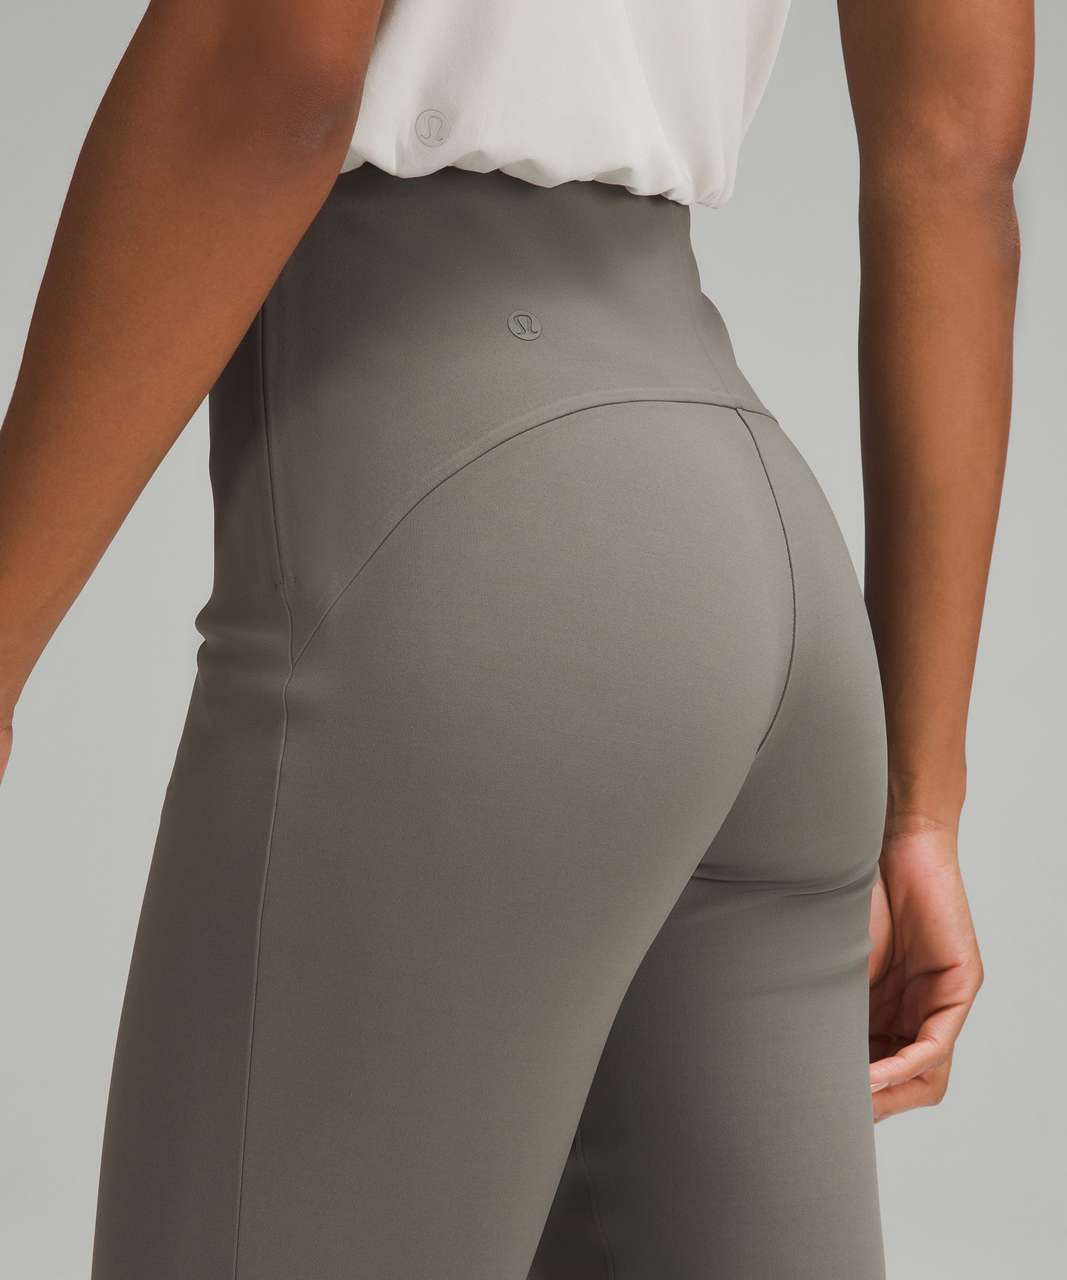 lululemon Base Pace High-Rise Crop 23 graphite Grey Size 12 LW6BO1S (NWT)